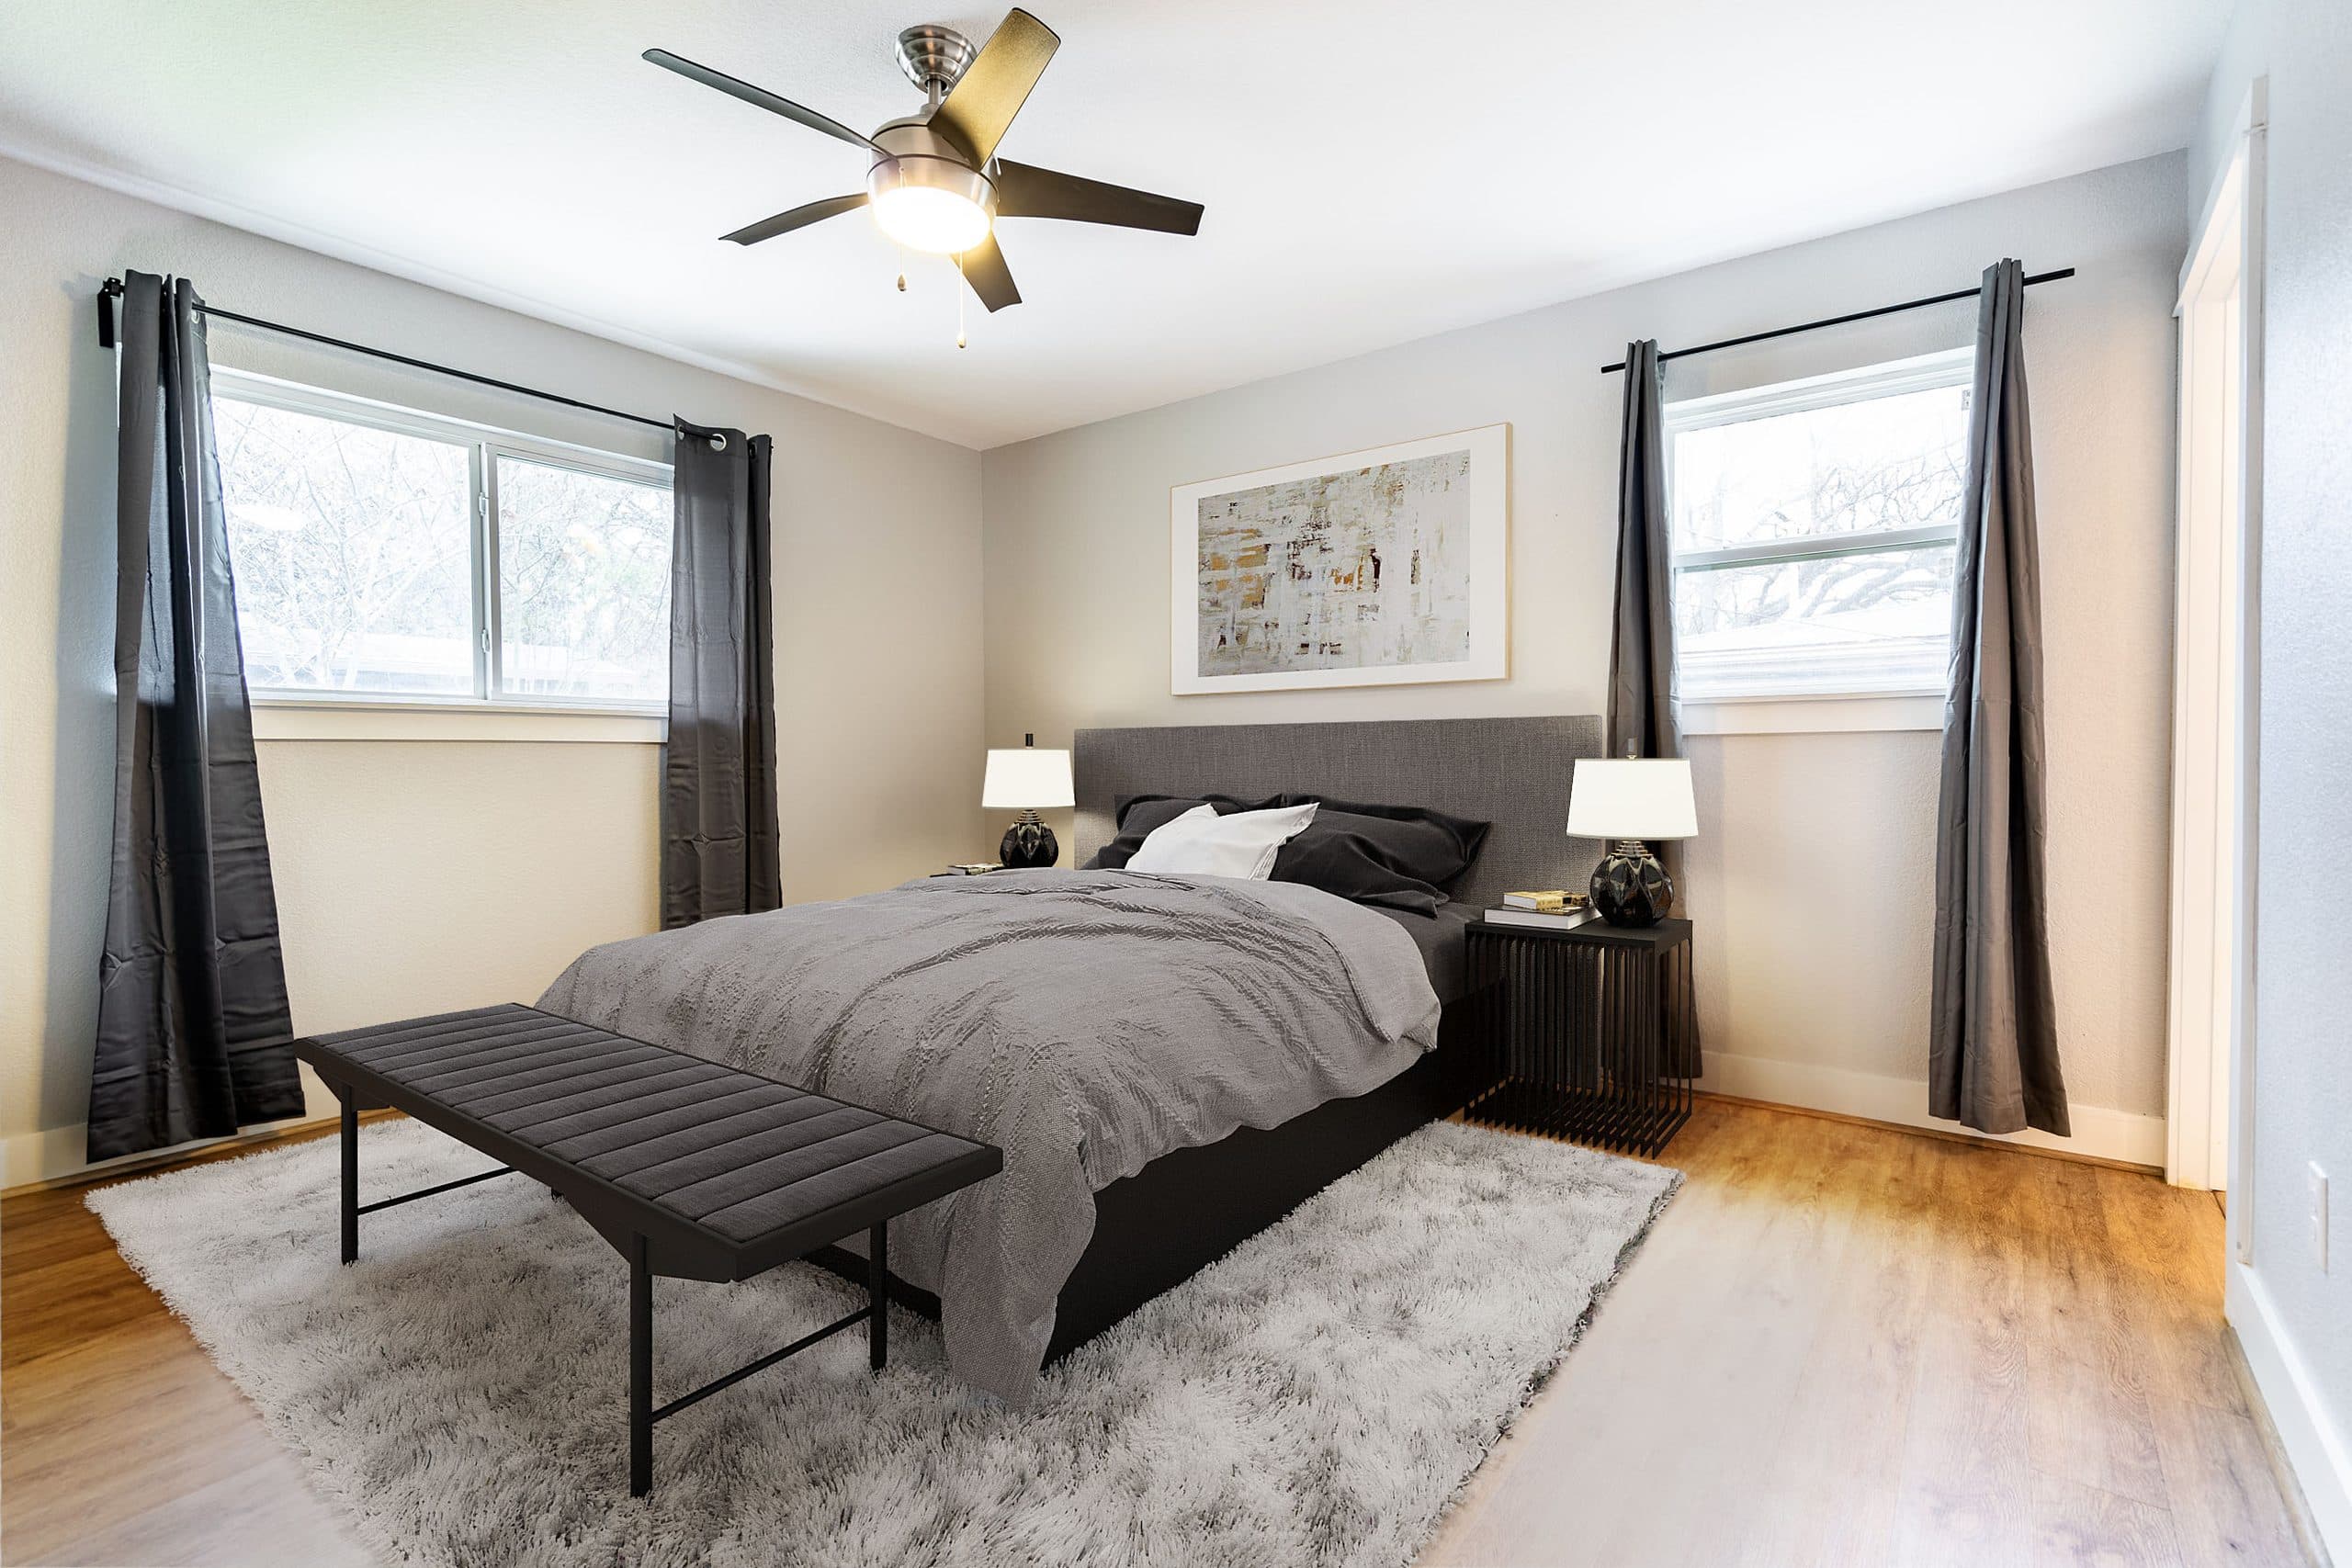 Photo 41 of #2249: Queen Bedroom A at June Homes